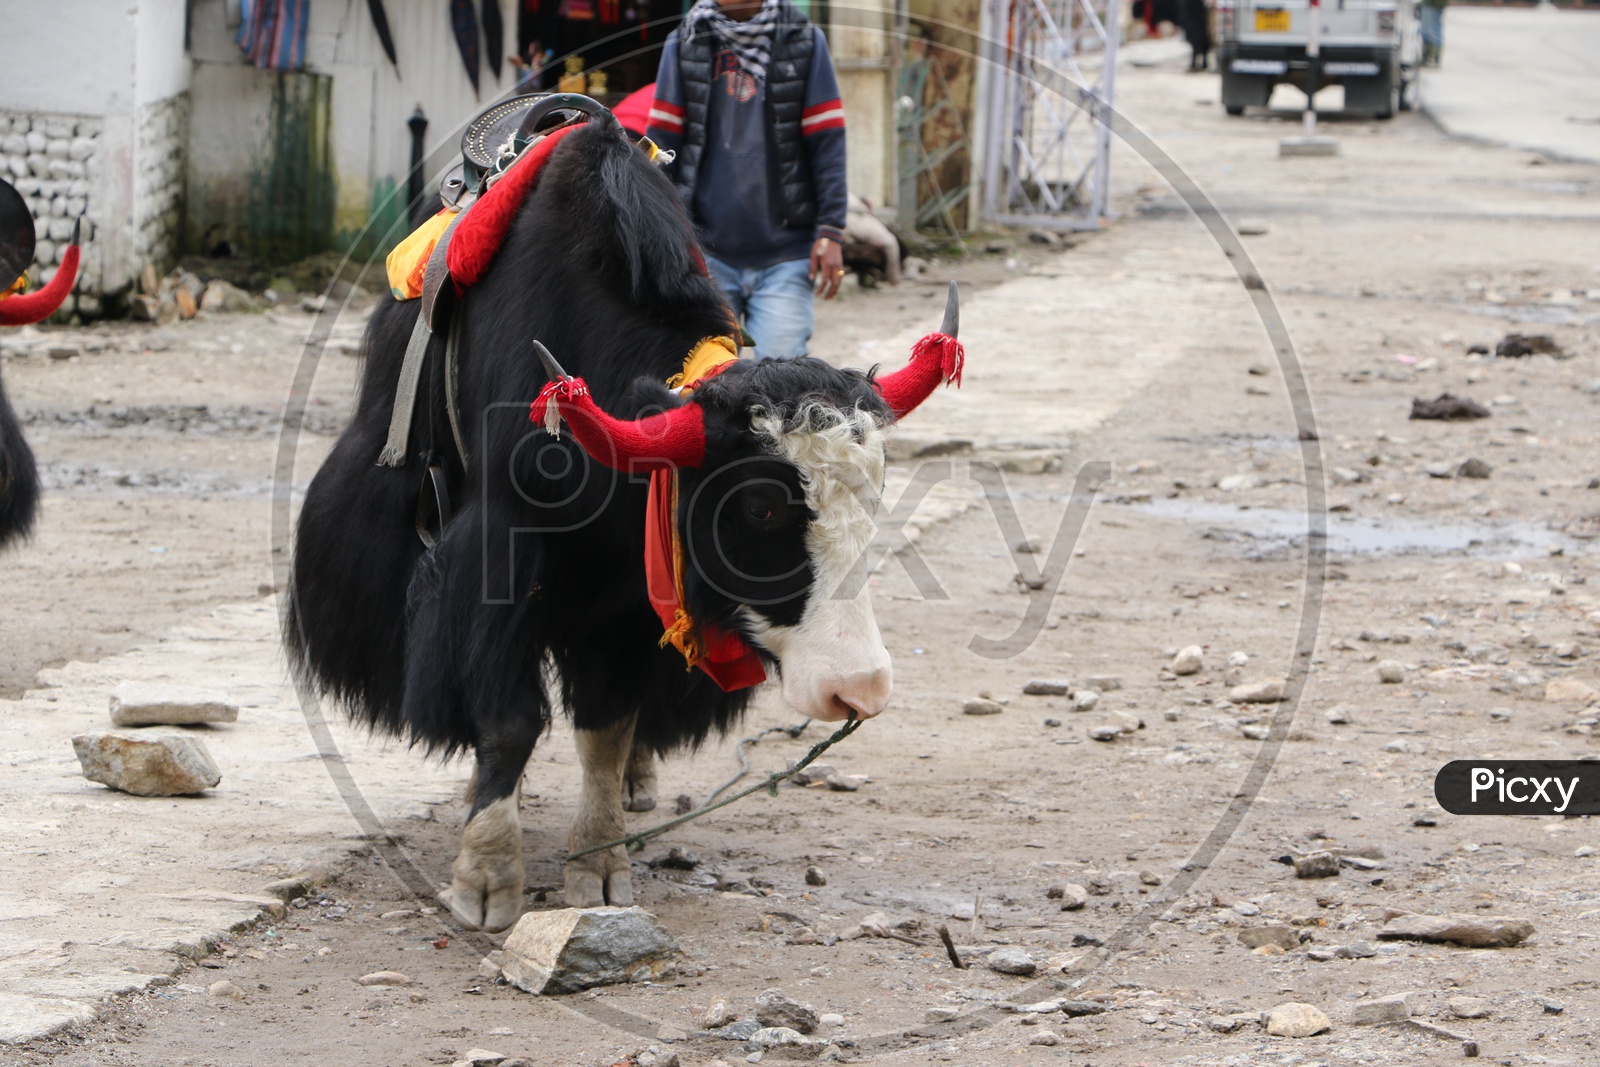 Yak nose tied with a rope to its leg